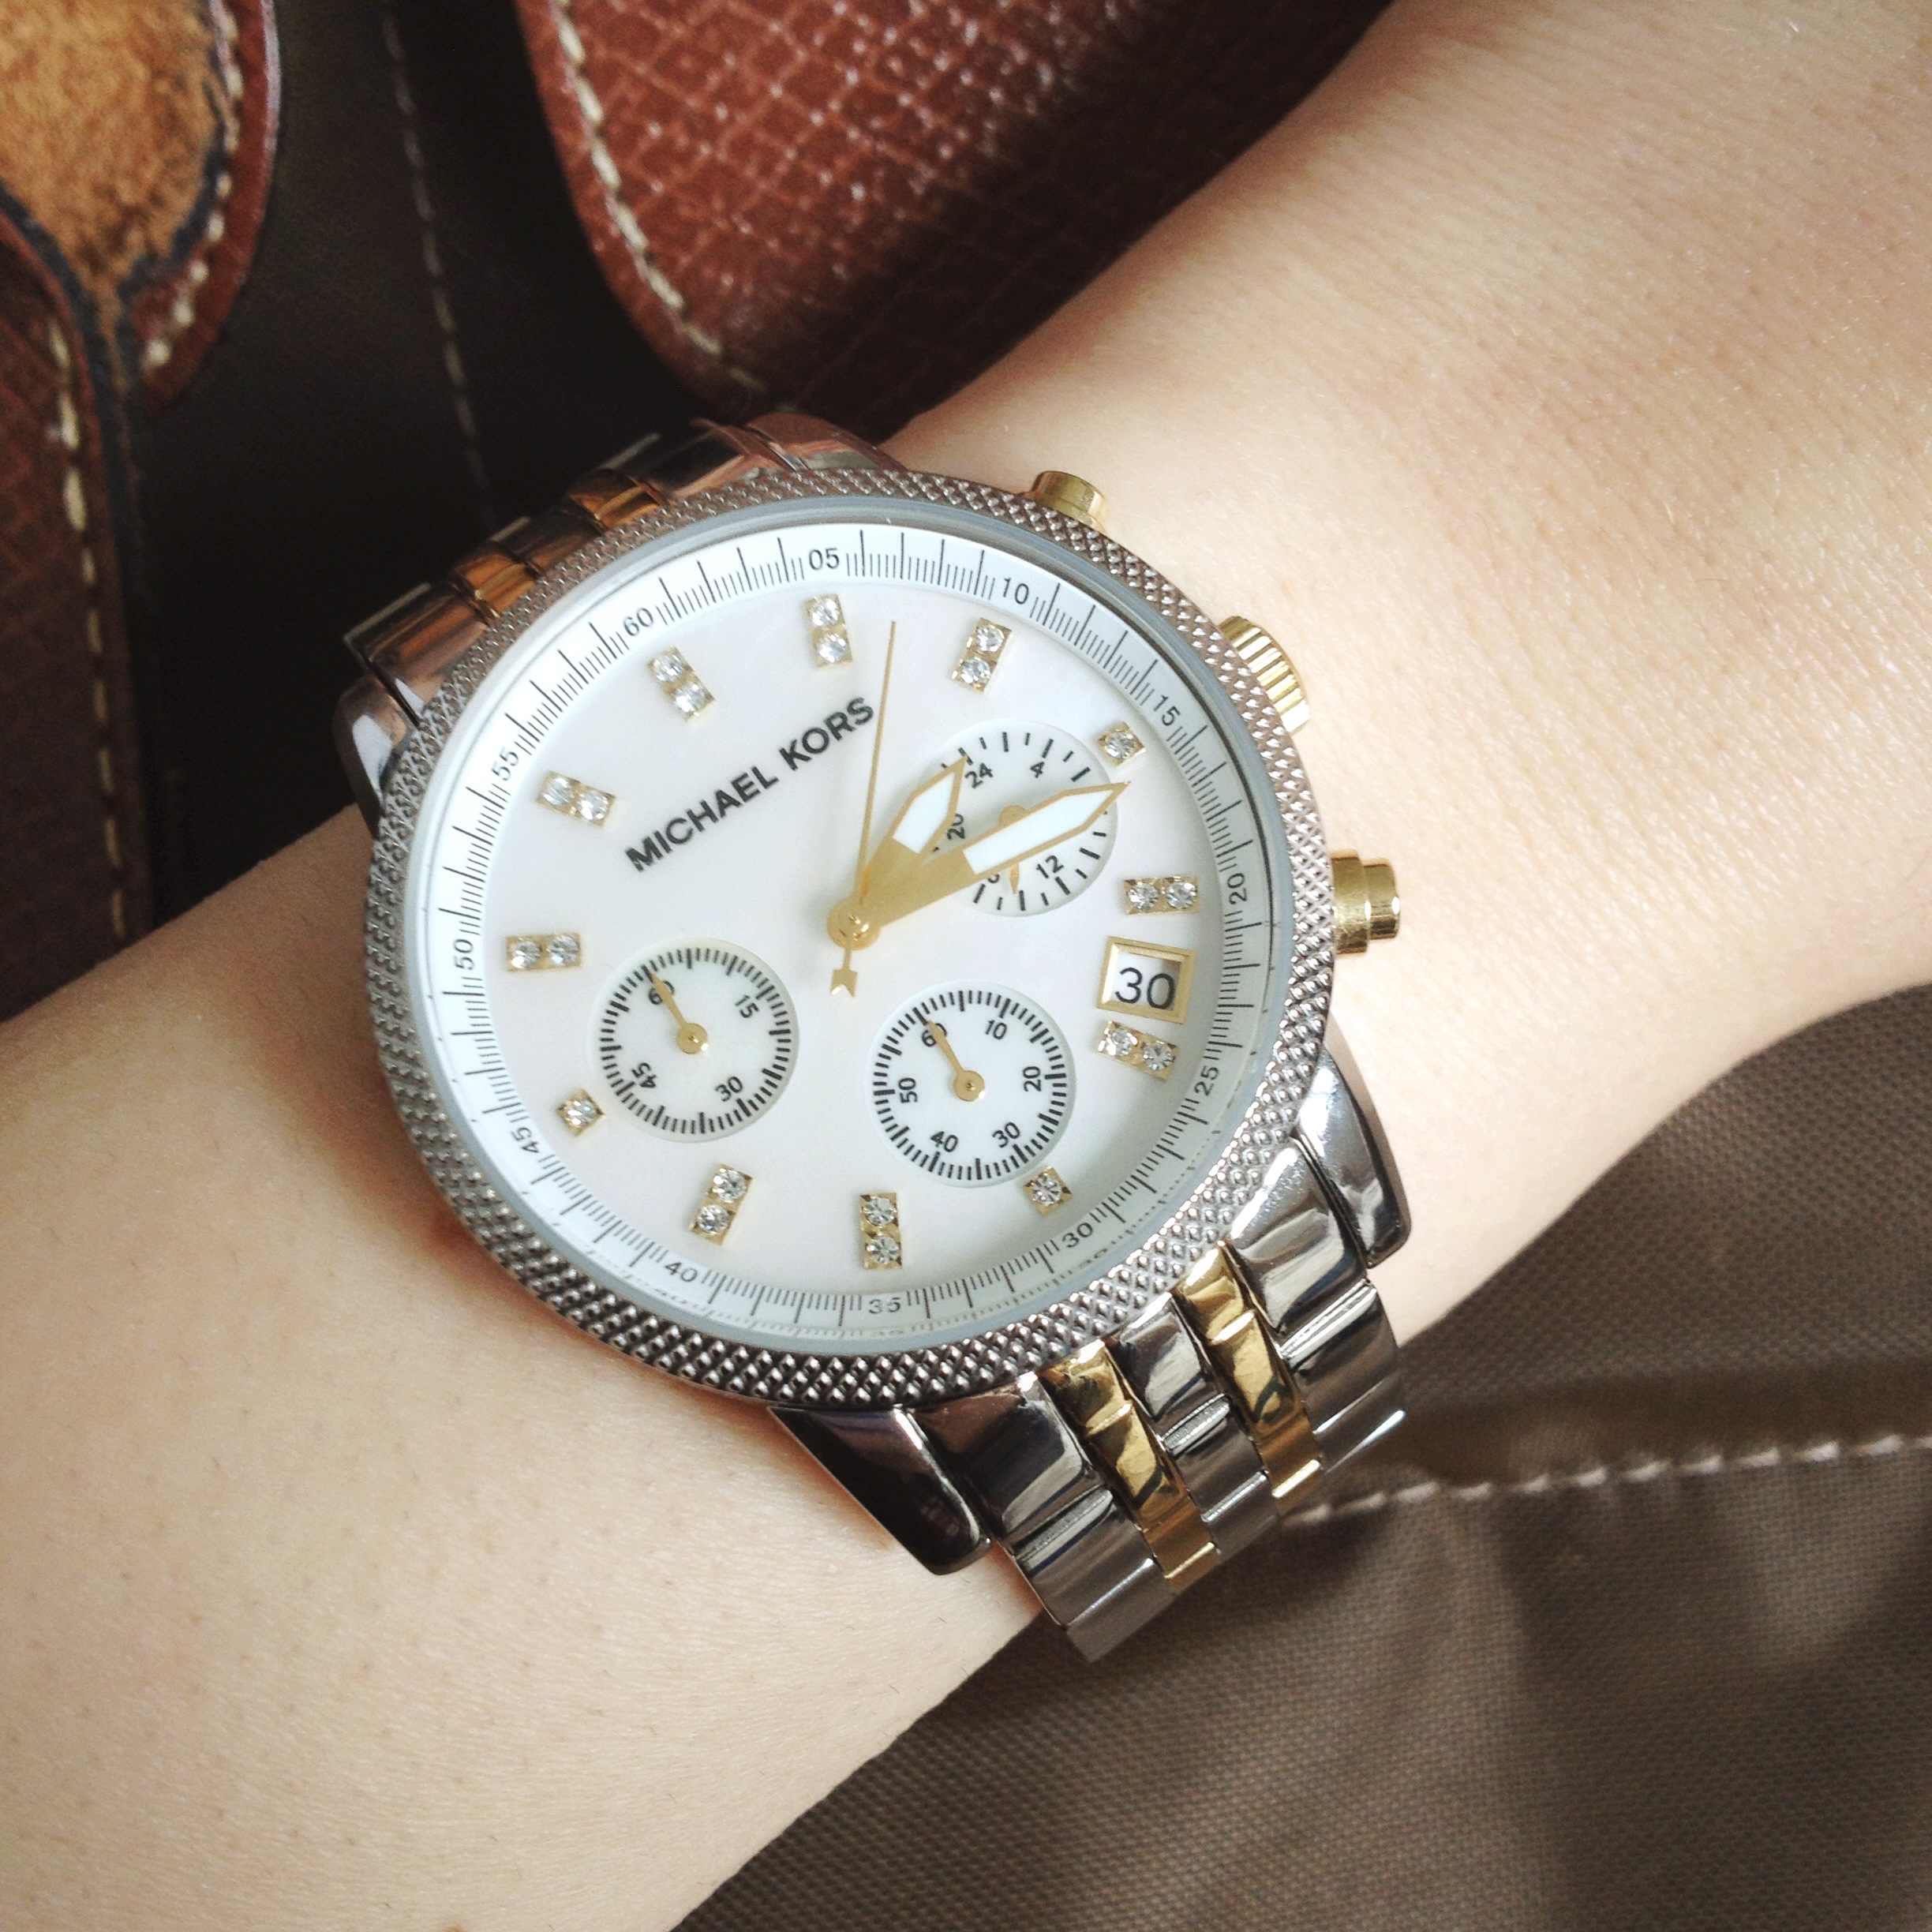 Michael Kors MK5057 Women's Stainless Steel Quartz Chronograph Two-Tone Mother Of Pearl